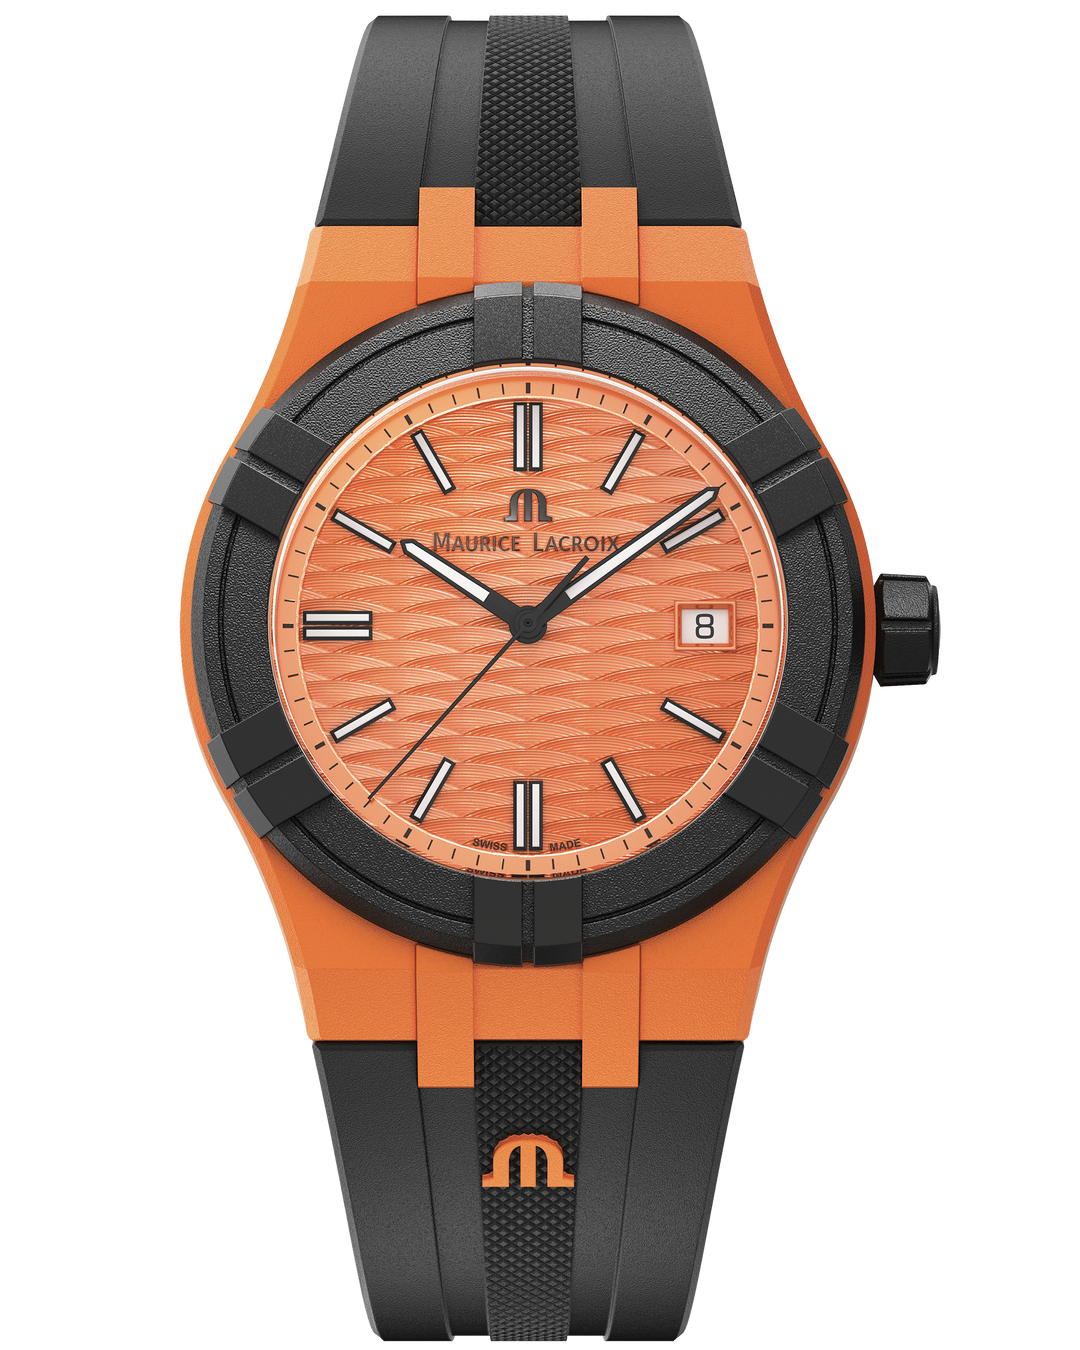 Maurice Lacroix Watch Maurice Lacroix Swiss-made AIKON #Tide Date 40mm Authentic Watch Orange Maurice Lacroix Swiss-made AIKON #Tide Date 40mm Authentic Watch I Buy Brand